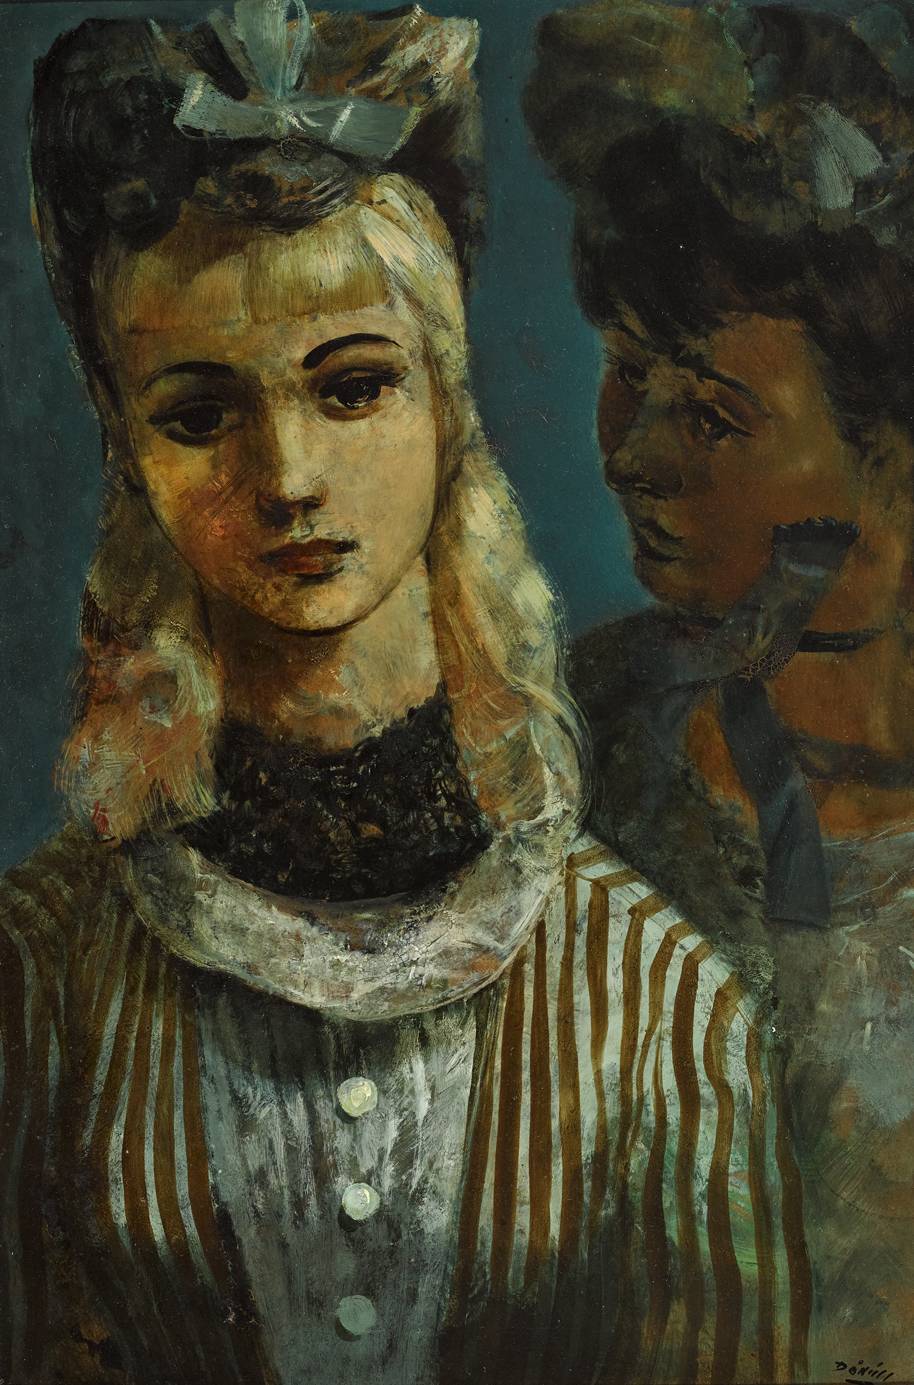 STAGE GIRLS by Daniel O'Neill (1920-1974) (1920-1974) at Whyte's Auctions